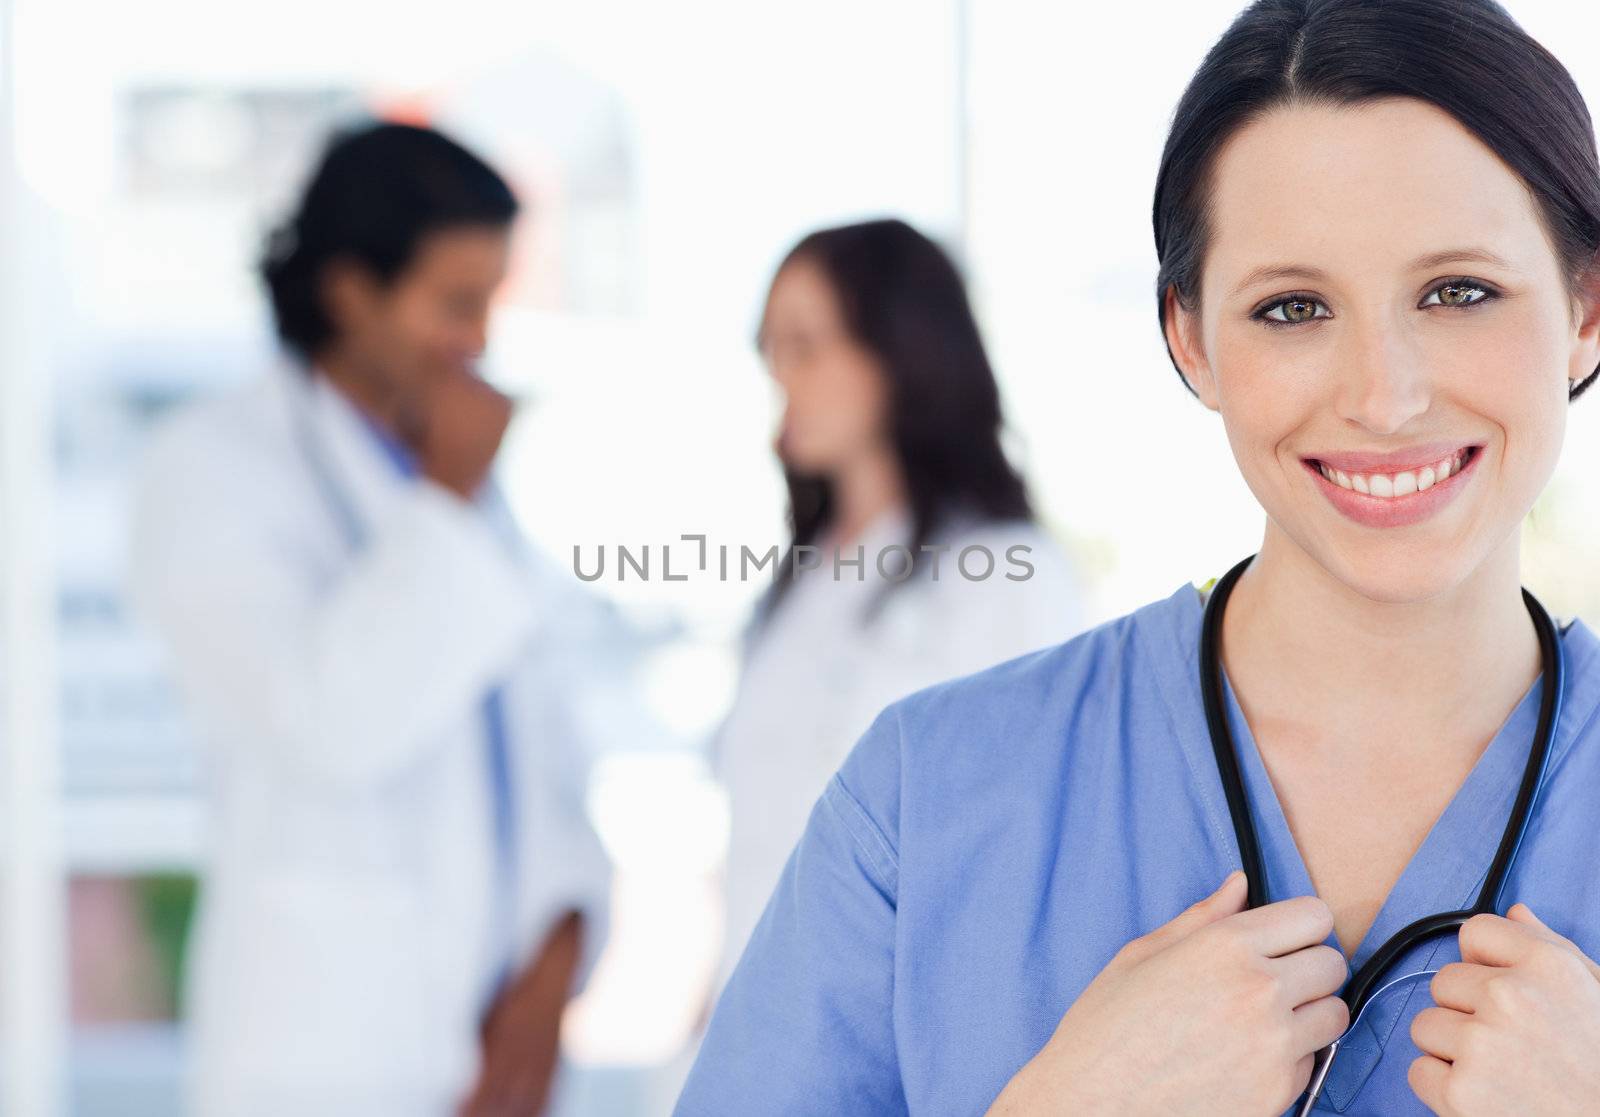 Young smiling nurse standing upright accompanied by her team who is standing behind her